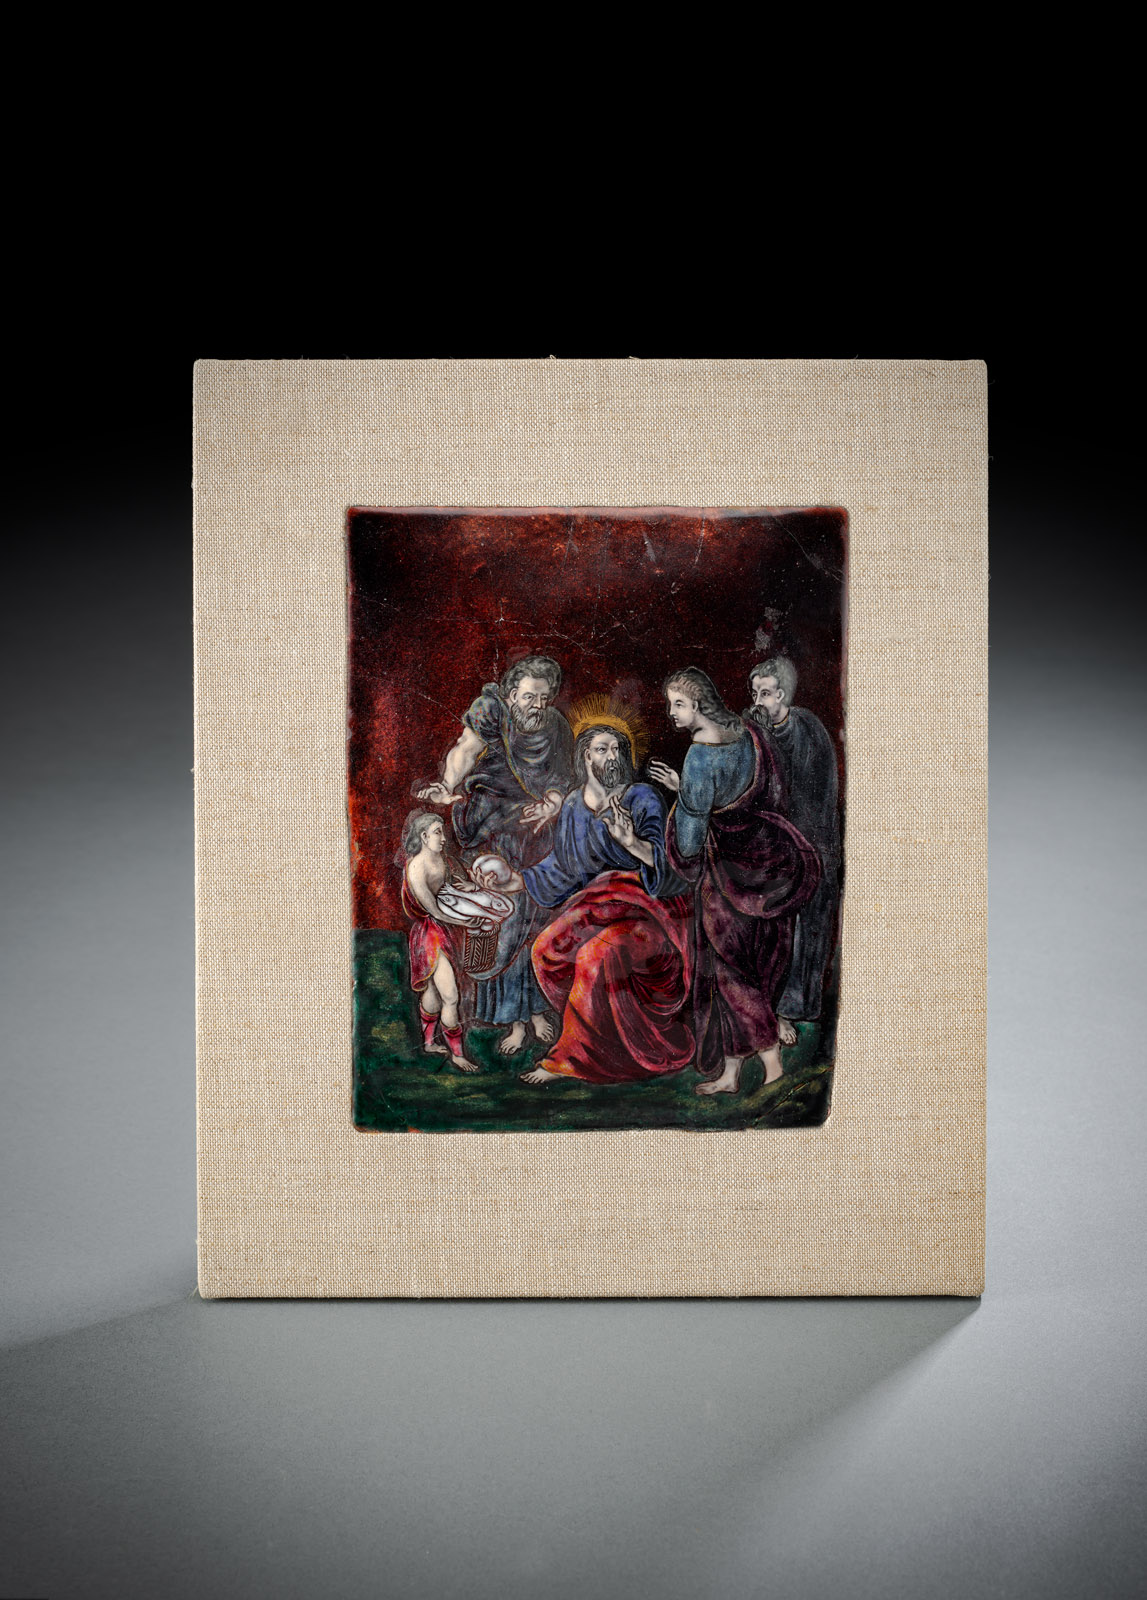 A LIMOGES ENAMELLED PLAQUE WITH BIBLICAL SCENE DEPICTING THE MULTIPLICATION OF THE LOAVES